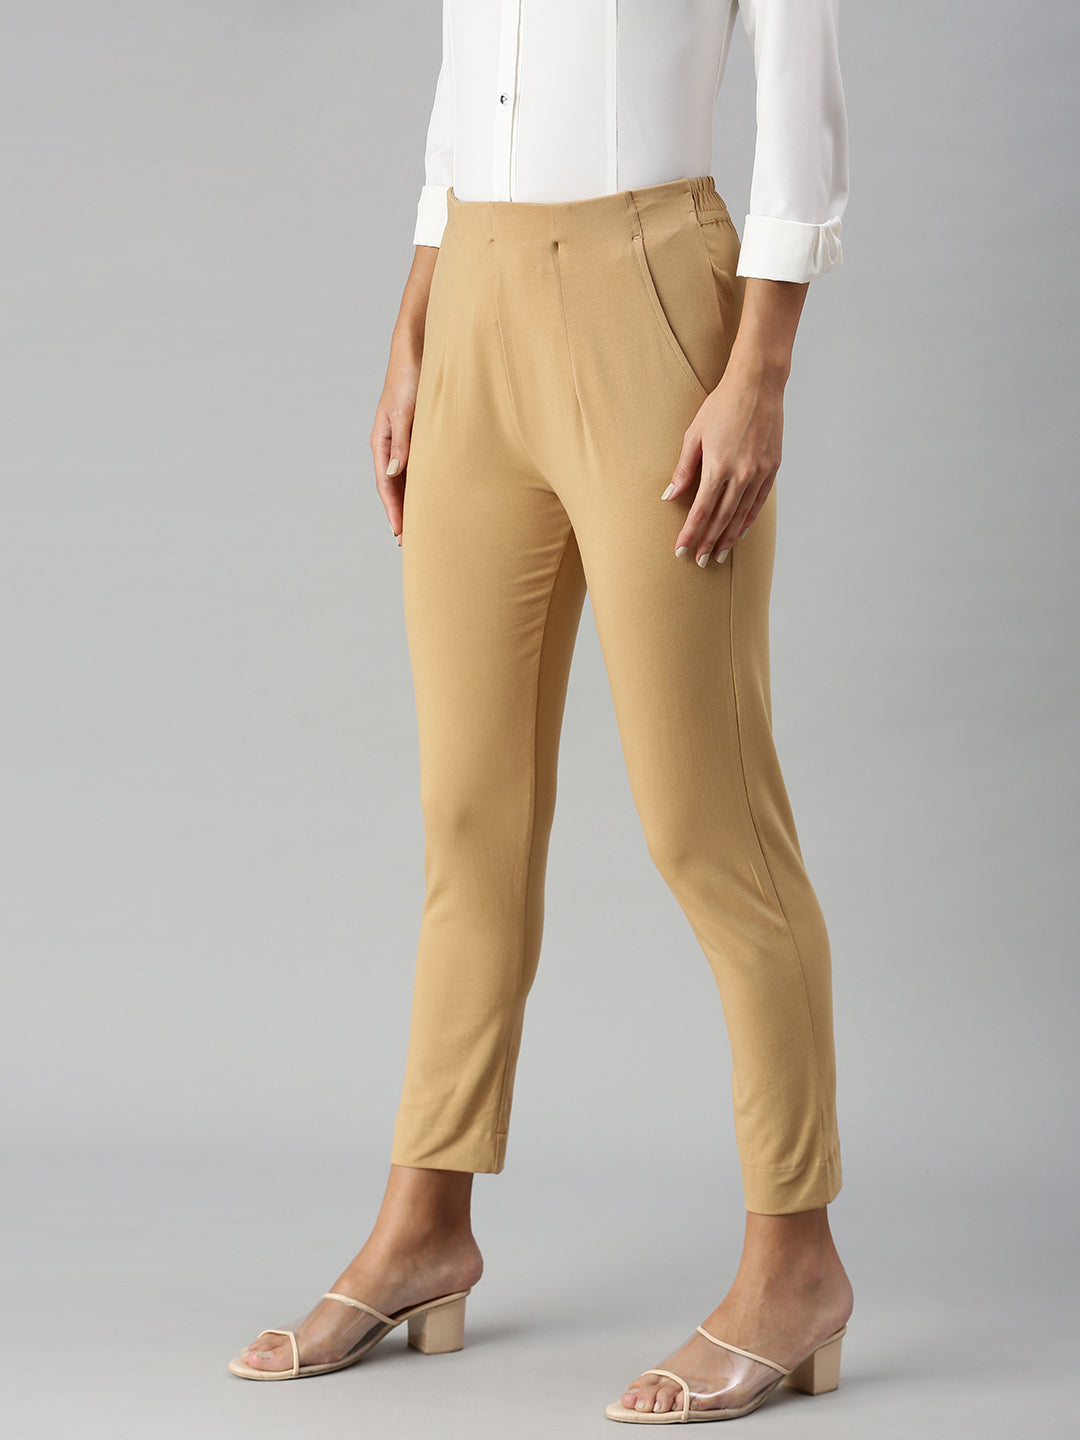 H&M Women Cigarette Trousers Price in India, Full Specifications & Offers |  DTashion.com